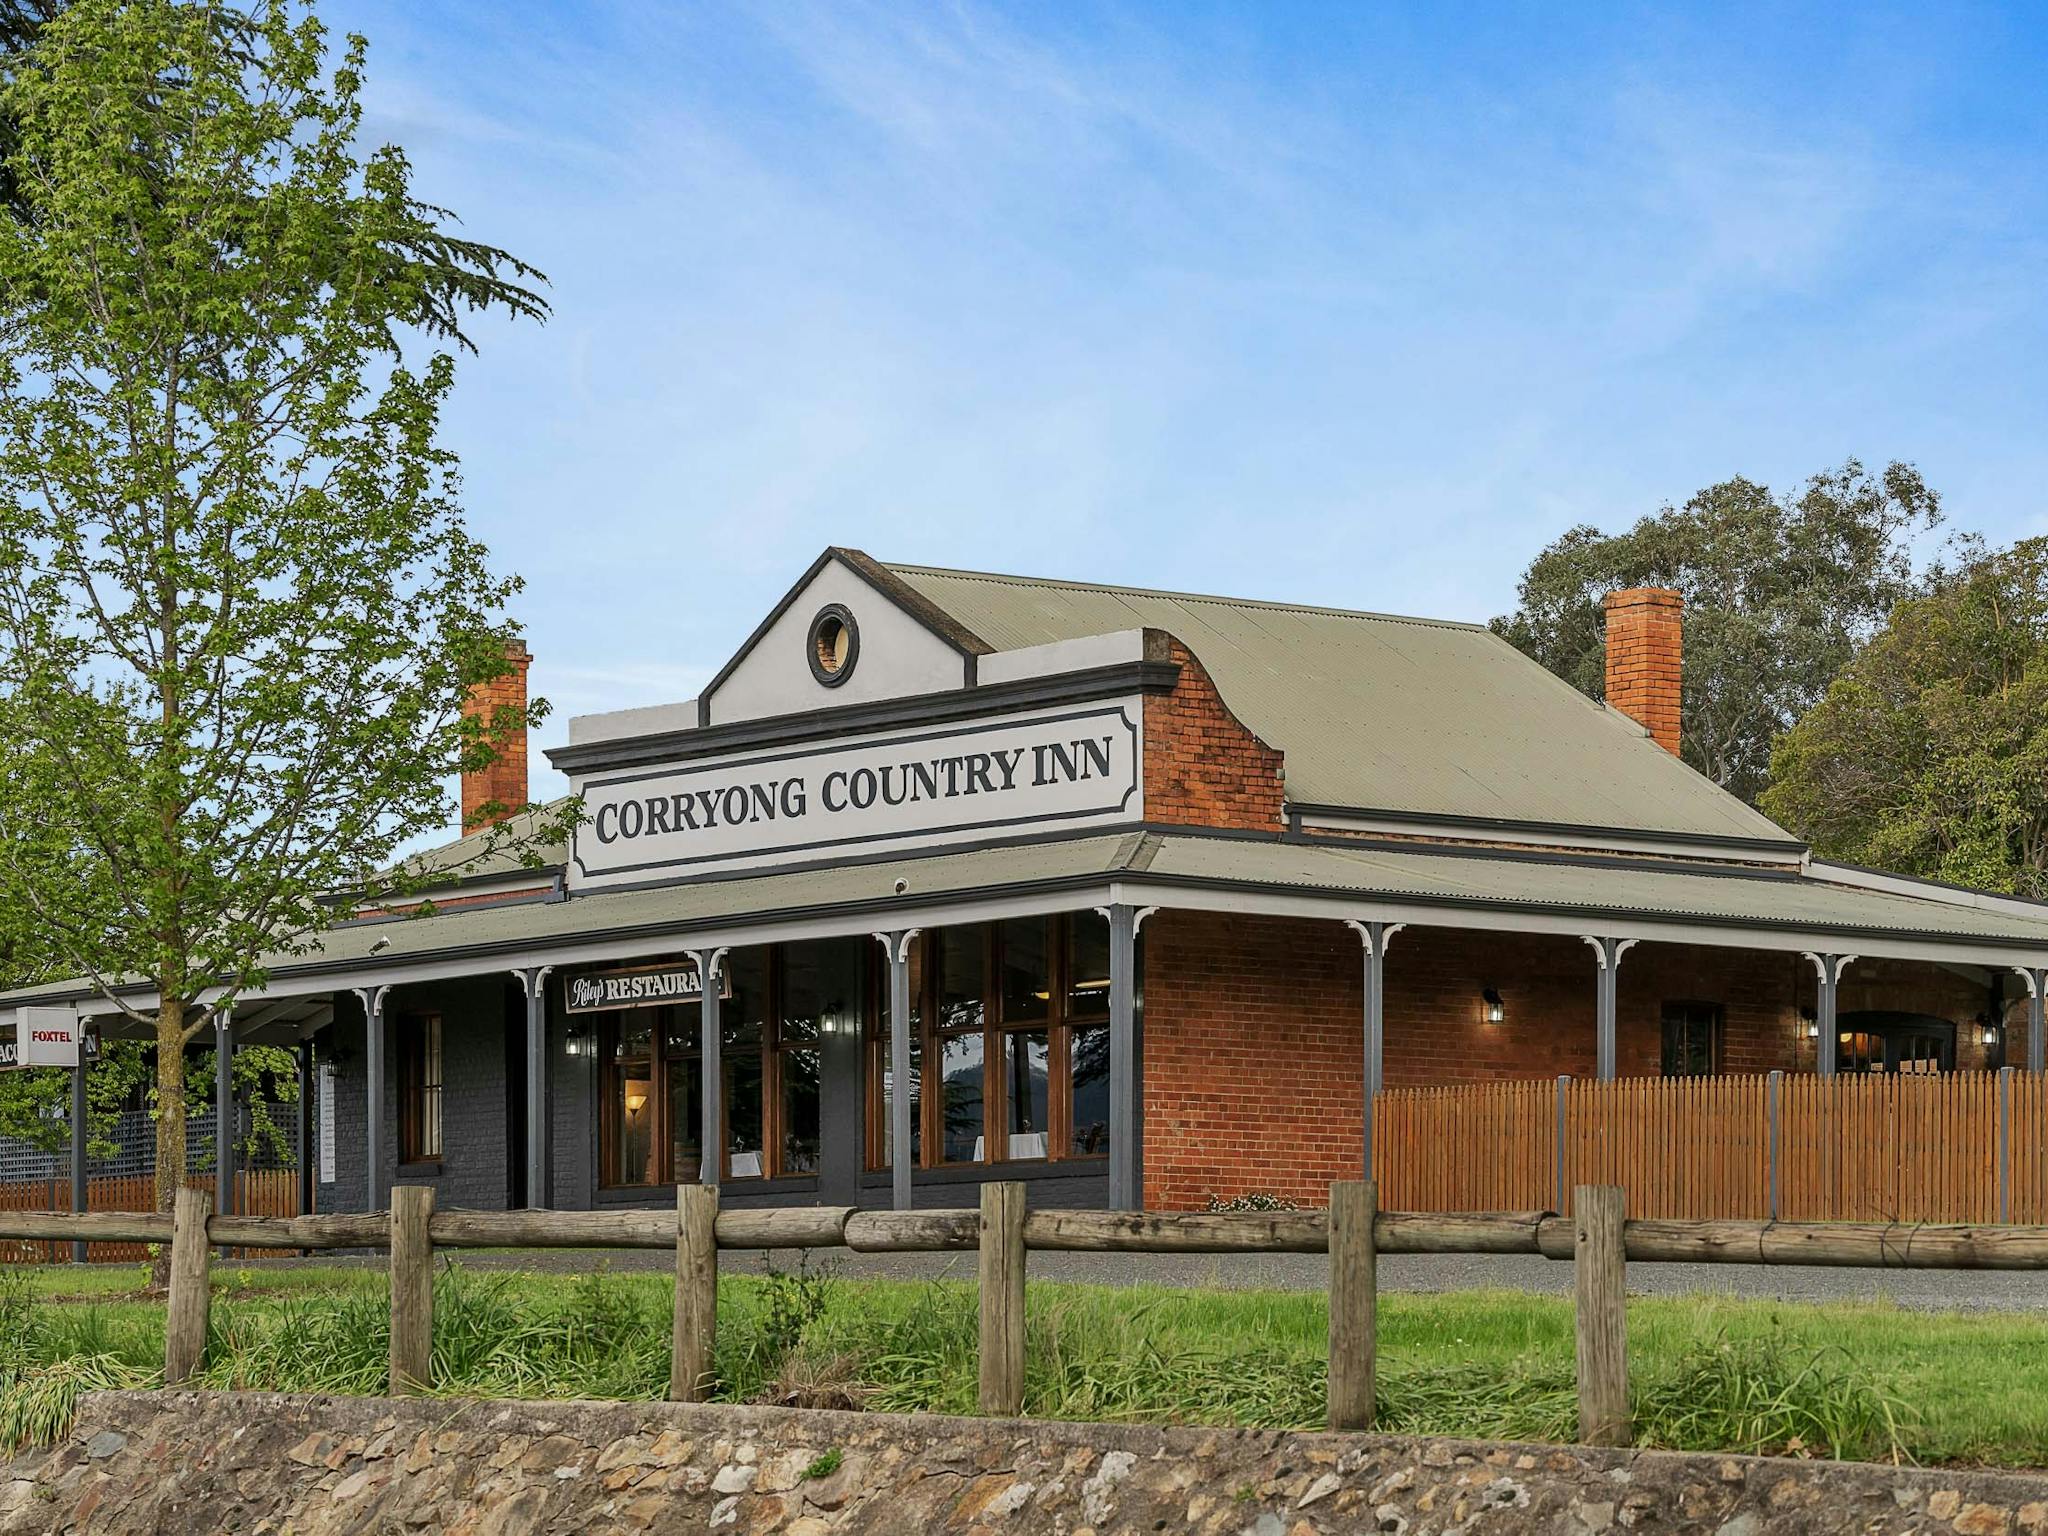 Corryong Country Inn, view from main road